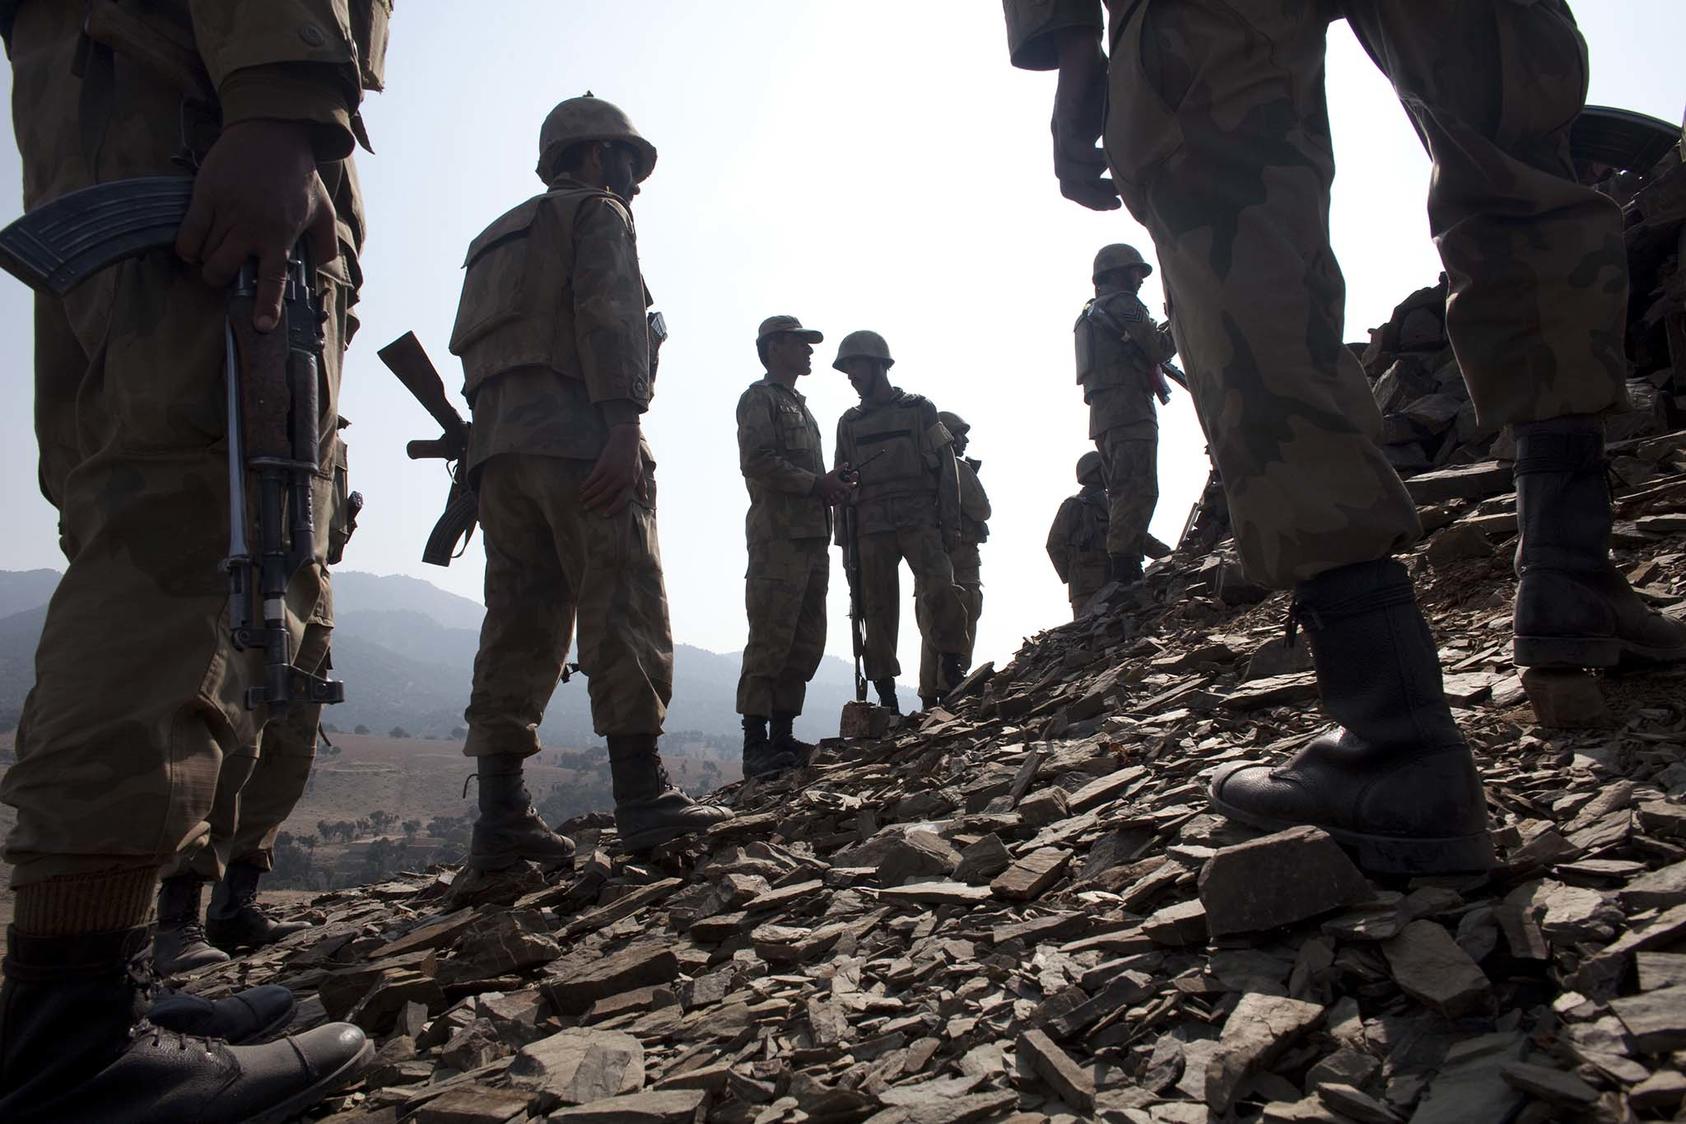 Members of the Pakistani army in Spin Jamaat, south Waziristan, part of Pakistan's Federally Administered Tribal Areas, Thursday, Oct. 29, 2009. The Pakistani Army has been engaged in a ground offensive against the Taliban in the region. (Tyler Hicks/The New York Times)